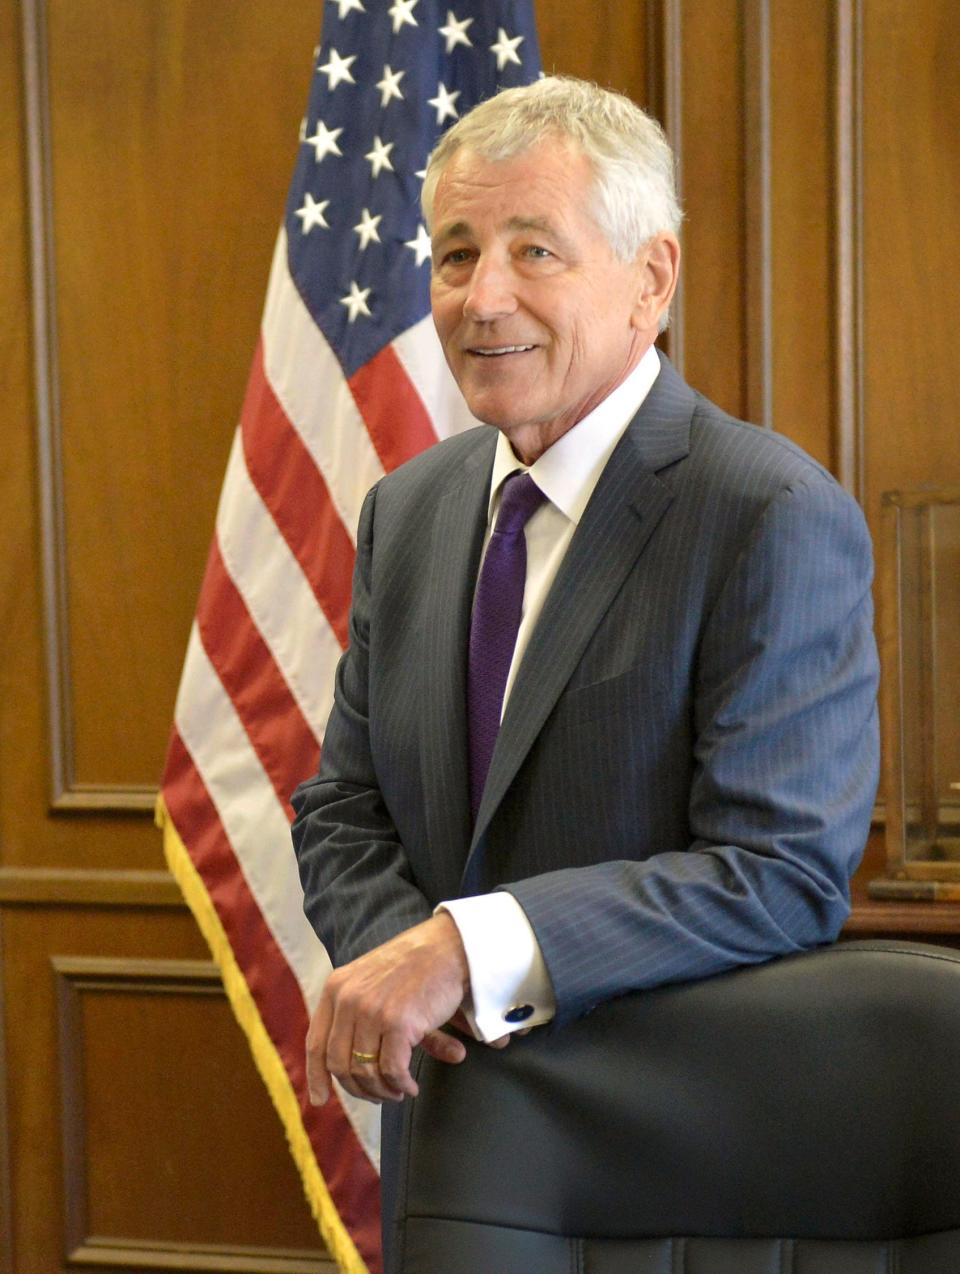 Chuck Hagel, a Vietnam War combat veteran and two-term U.S. senator from Nebraska who was the nation’s 24th secretary of Defense, is chairman of the Council on Criminal Justice's Veterans Justice Commission.